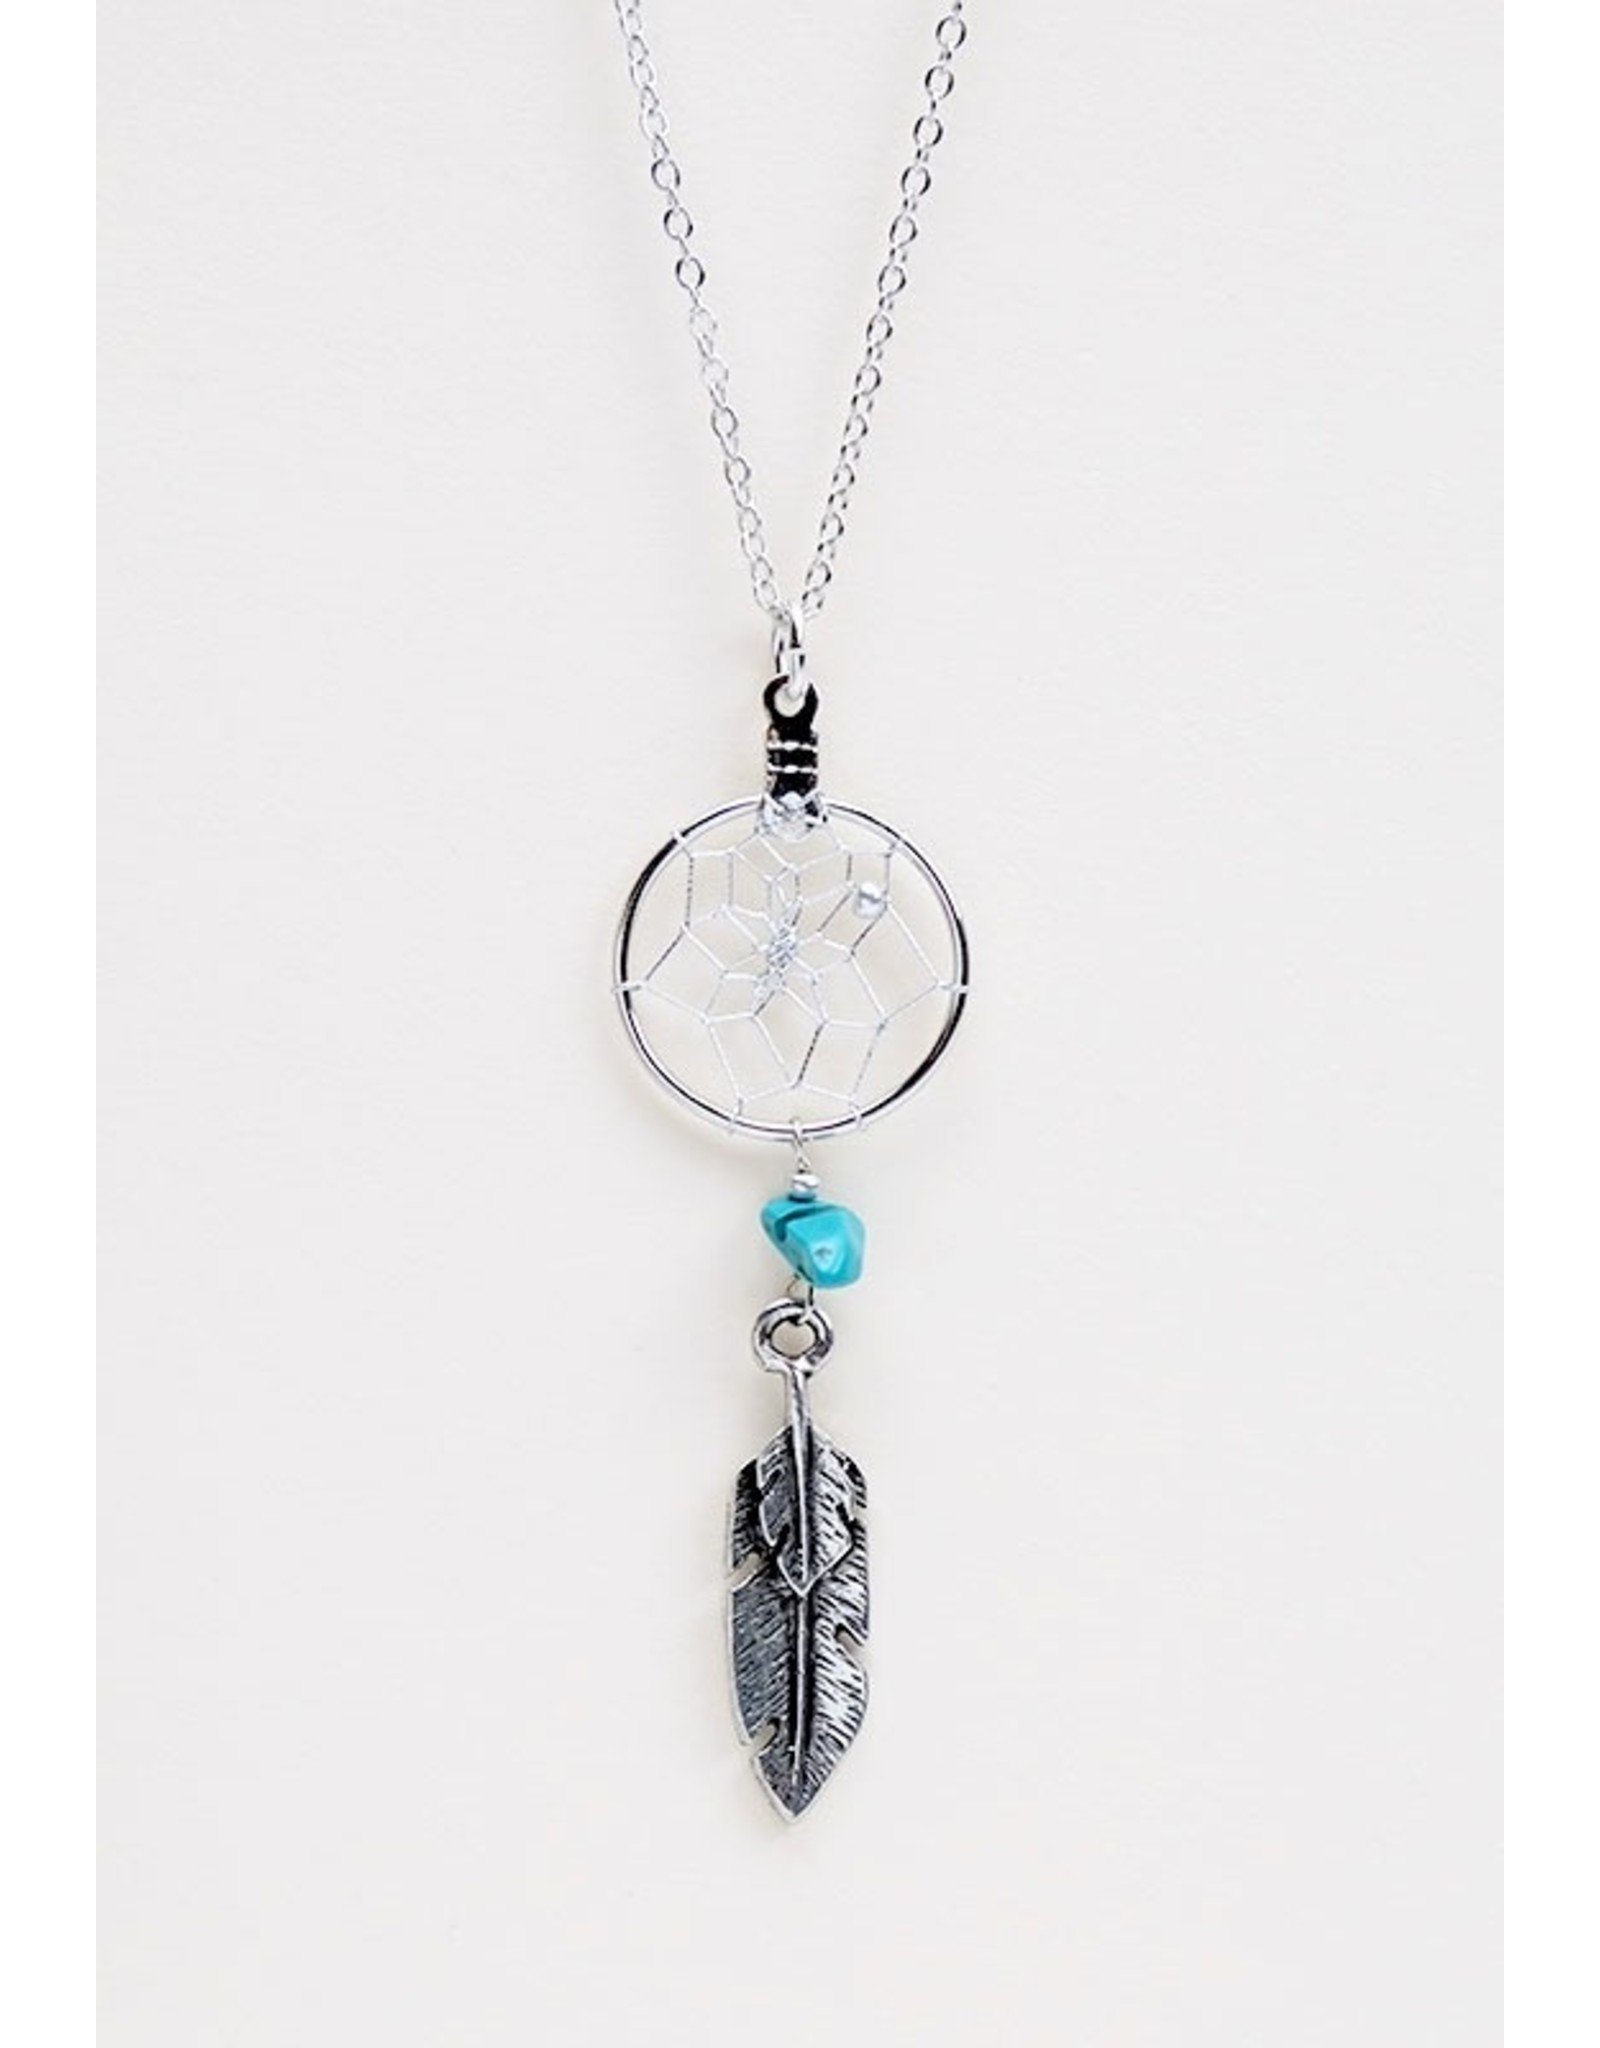 Dream Catcher Necklace with Turquoise - DC5-P